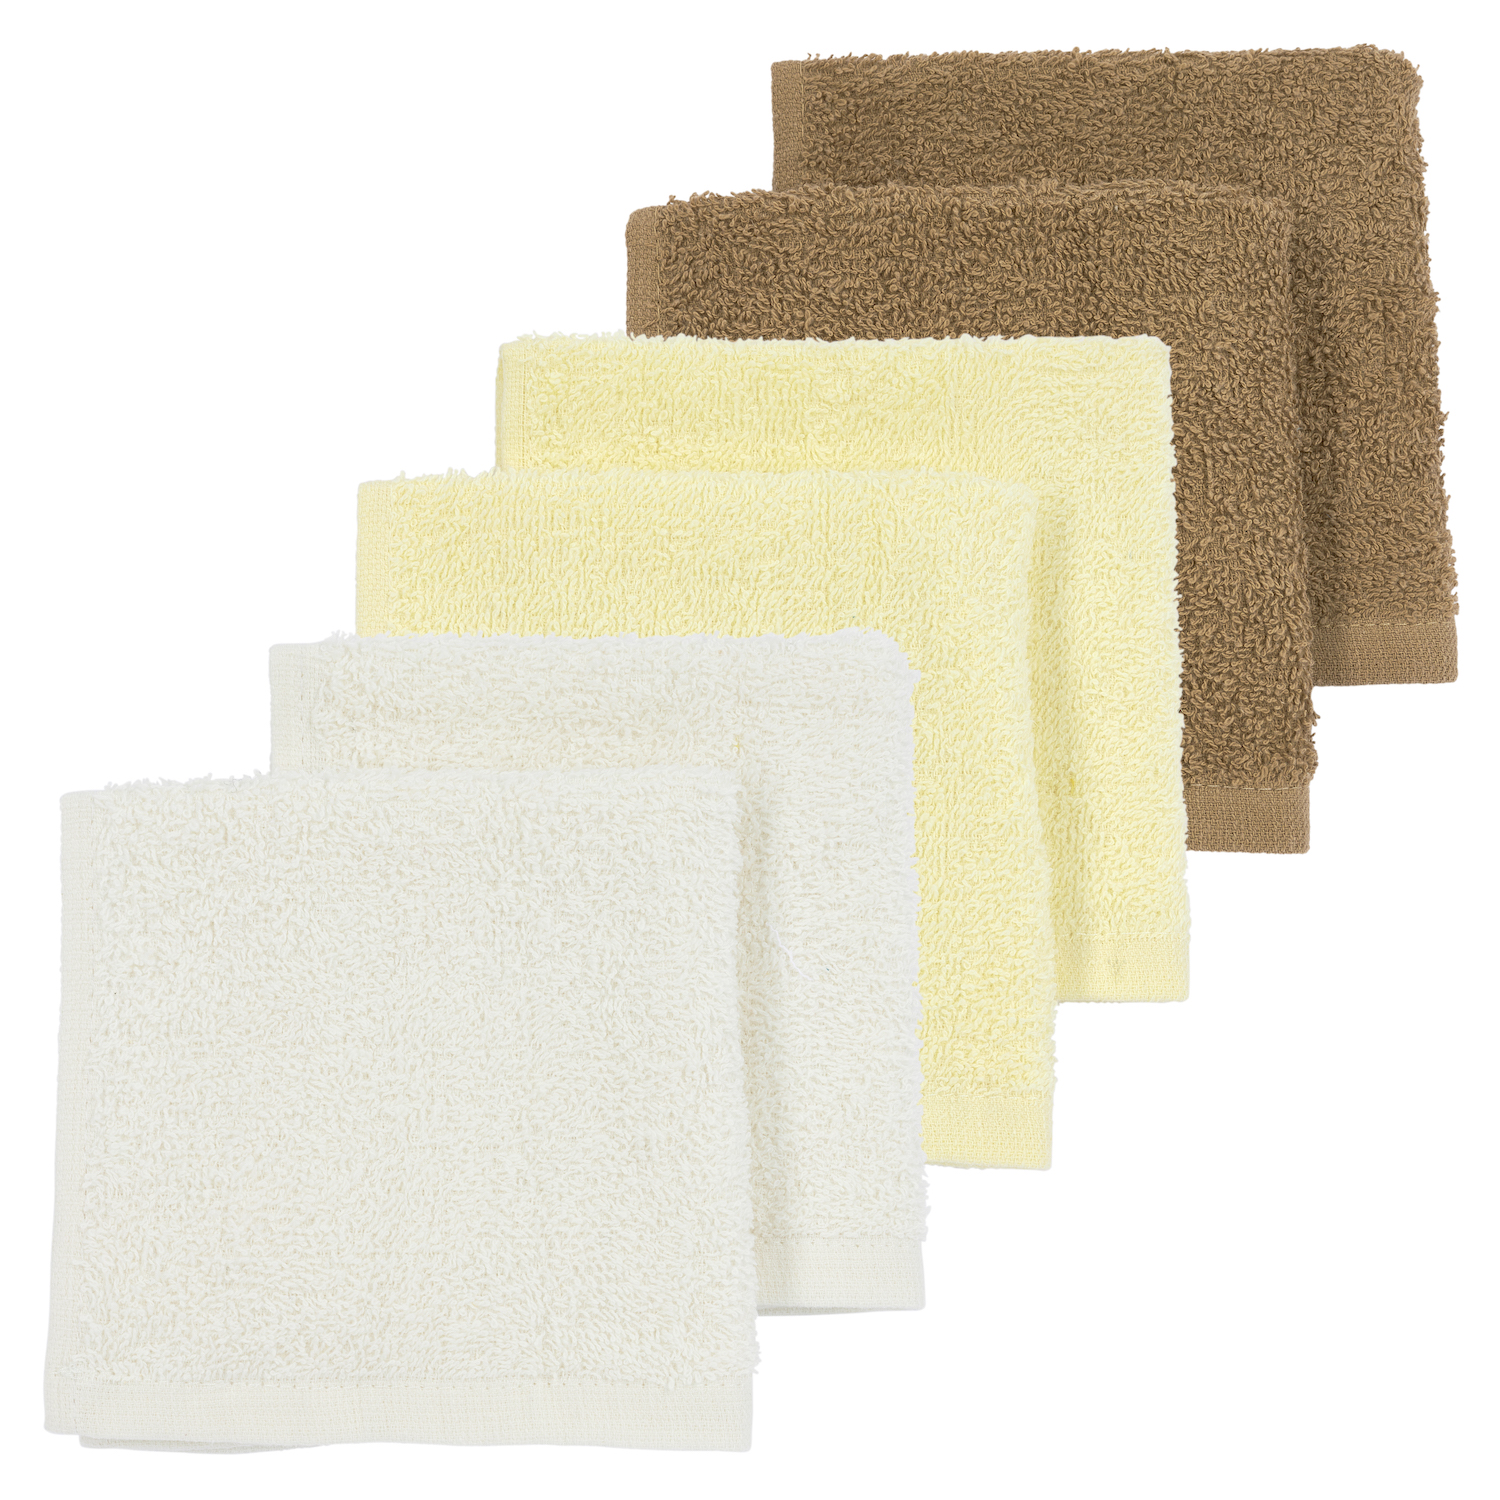 Basic Terry Face Cloths 6-pack - Offwhite/Soft Yellow/Toffee - 30x30cm